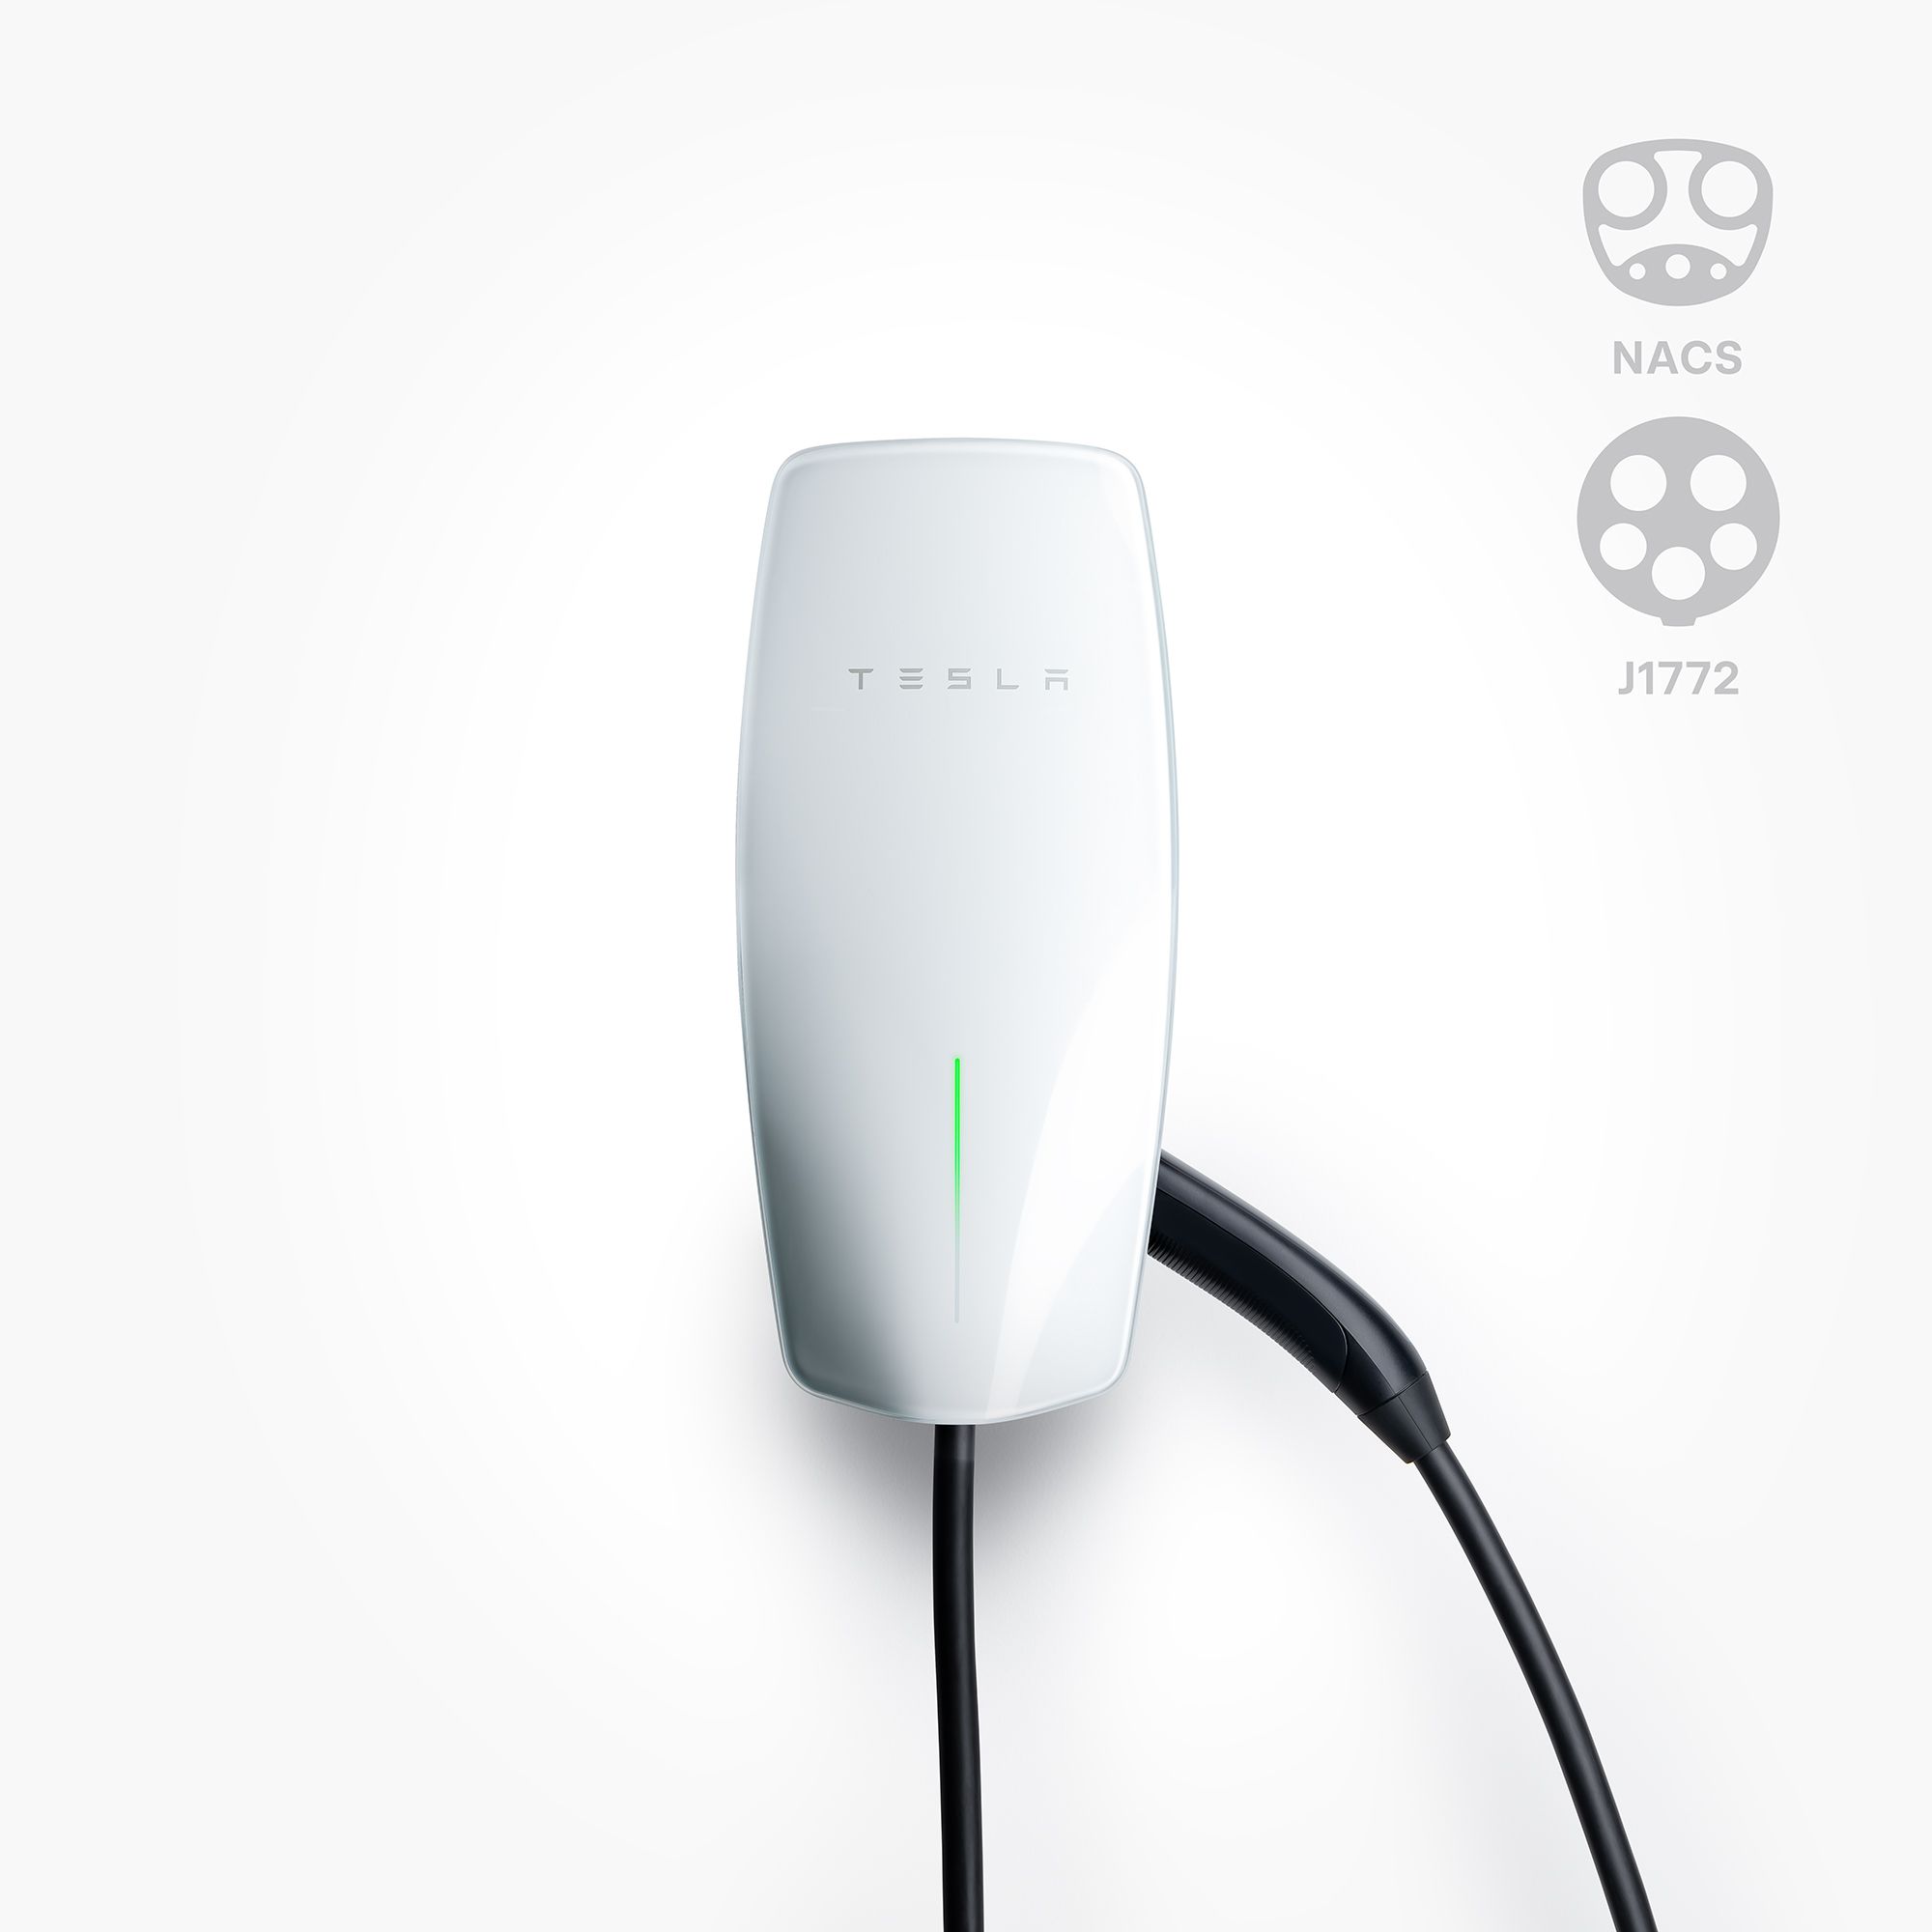 Tesla launches a new home charger that works with all electric